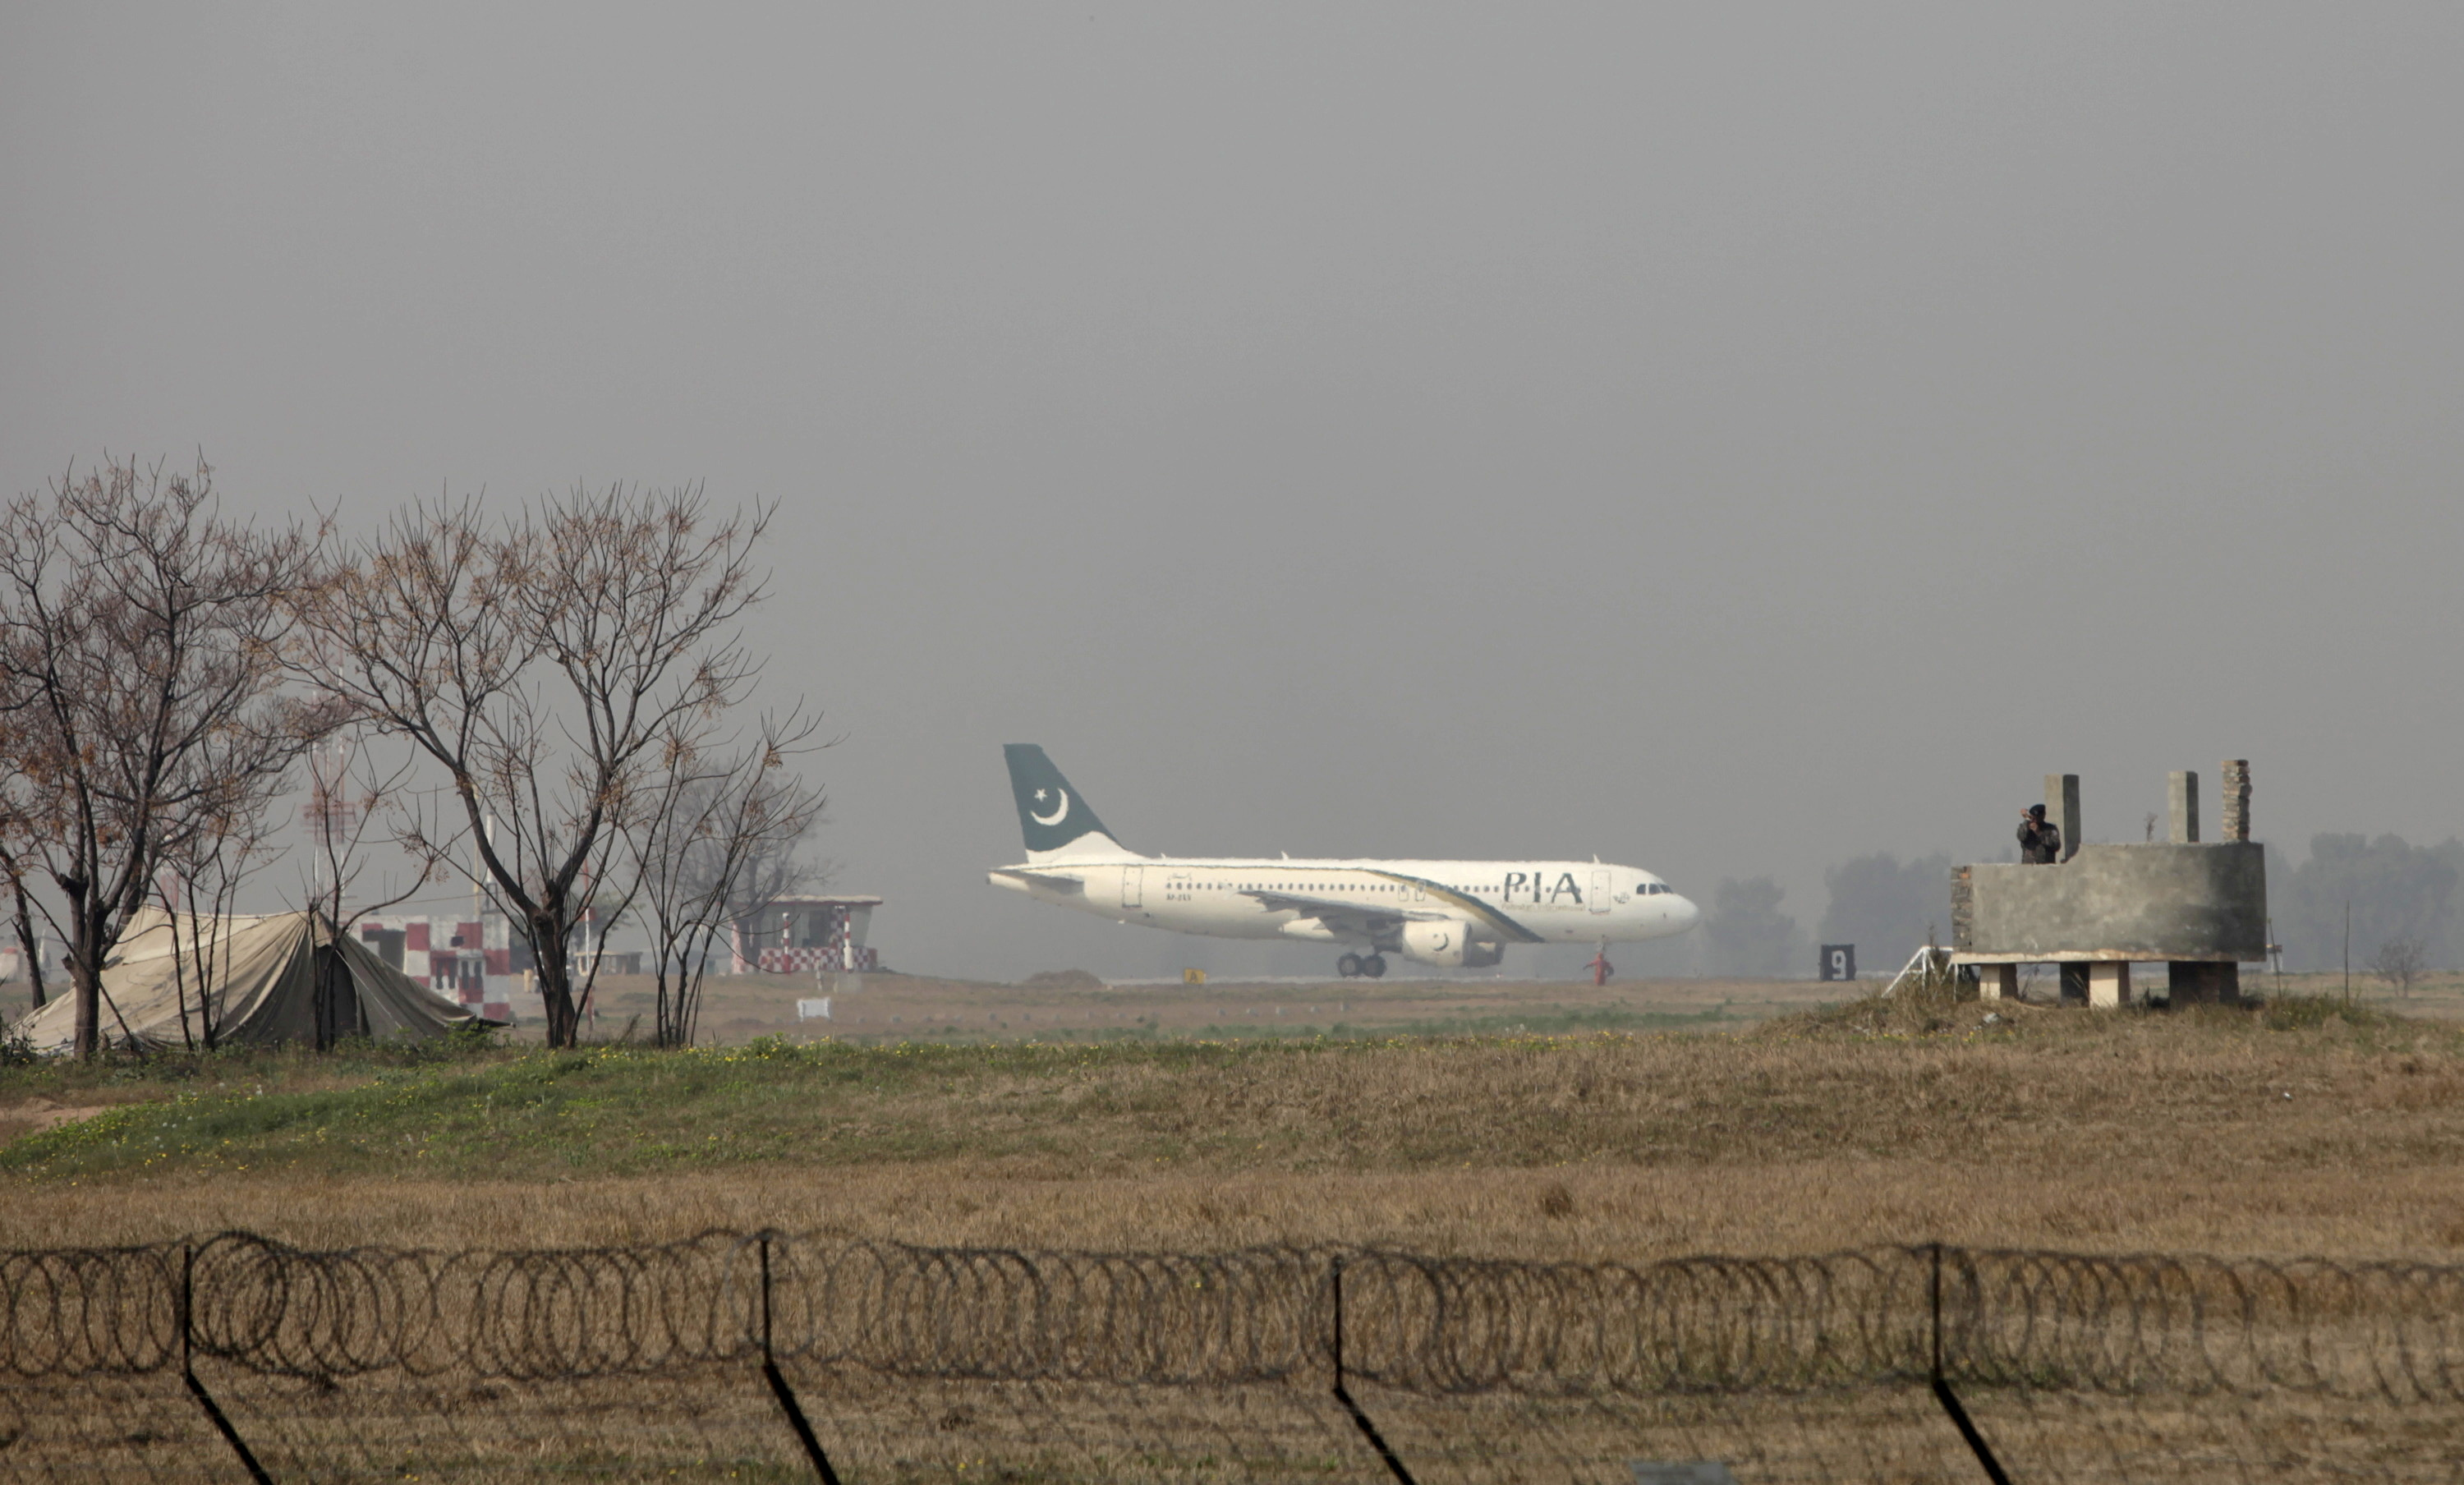 A Pakistan International Airlines (PIA) passenger plane prepares to take off from the Benazir International airport in Islamabad